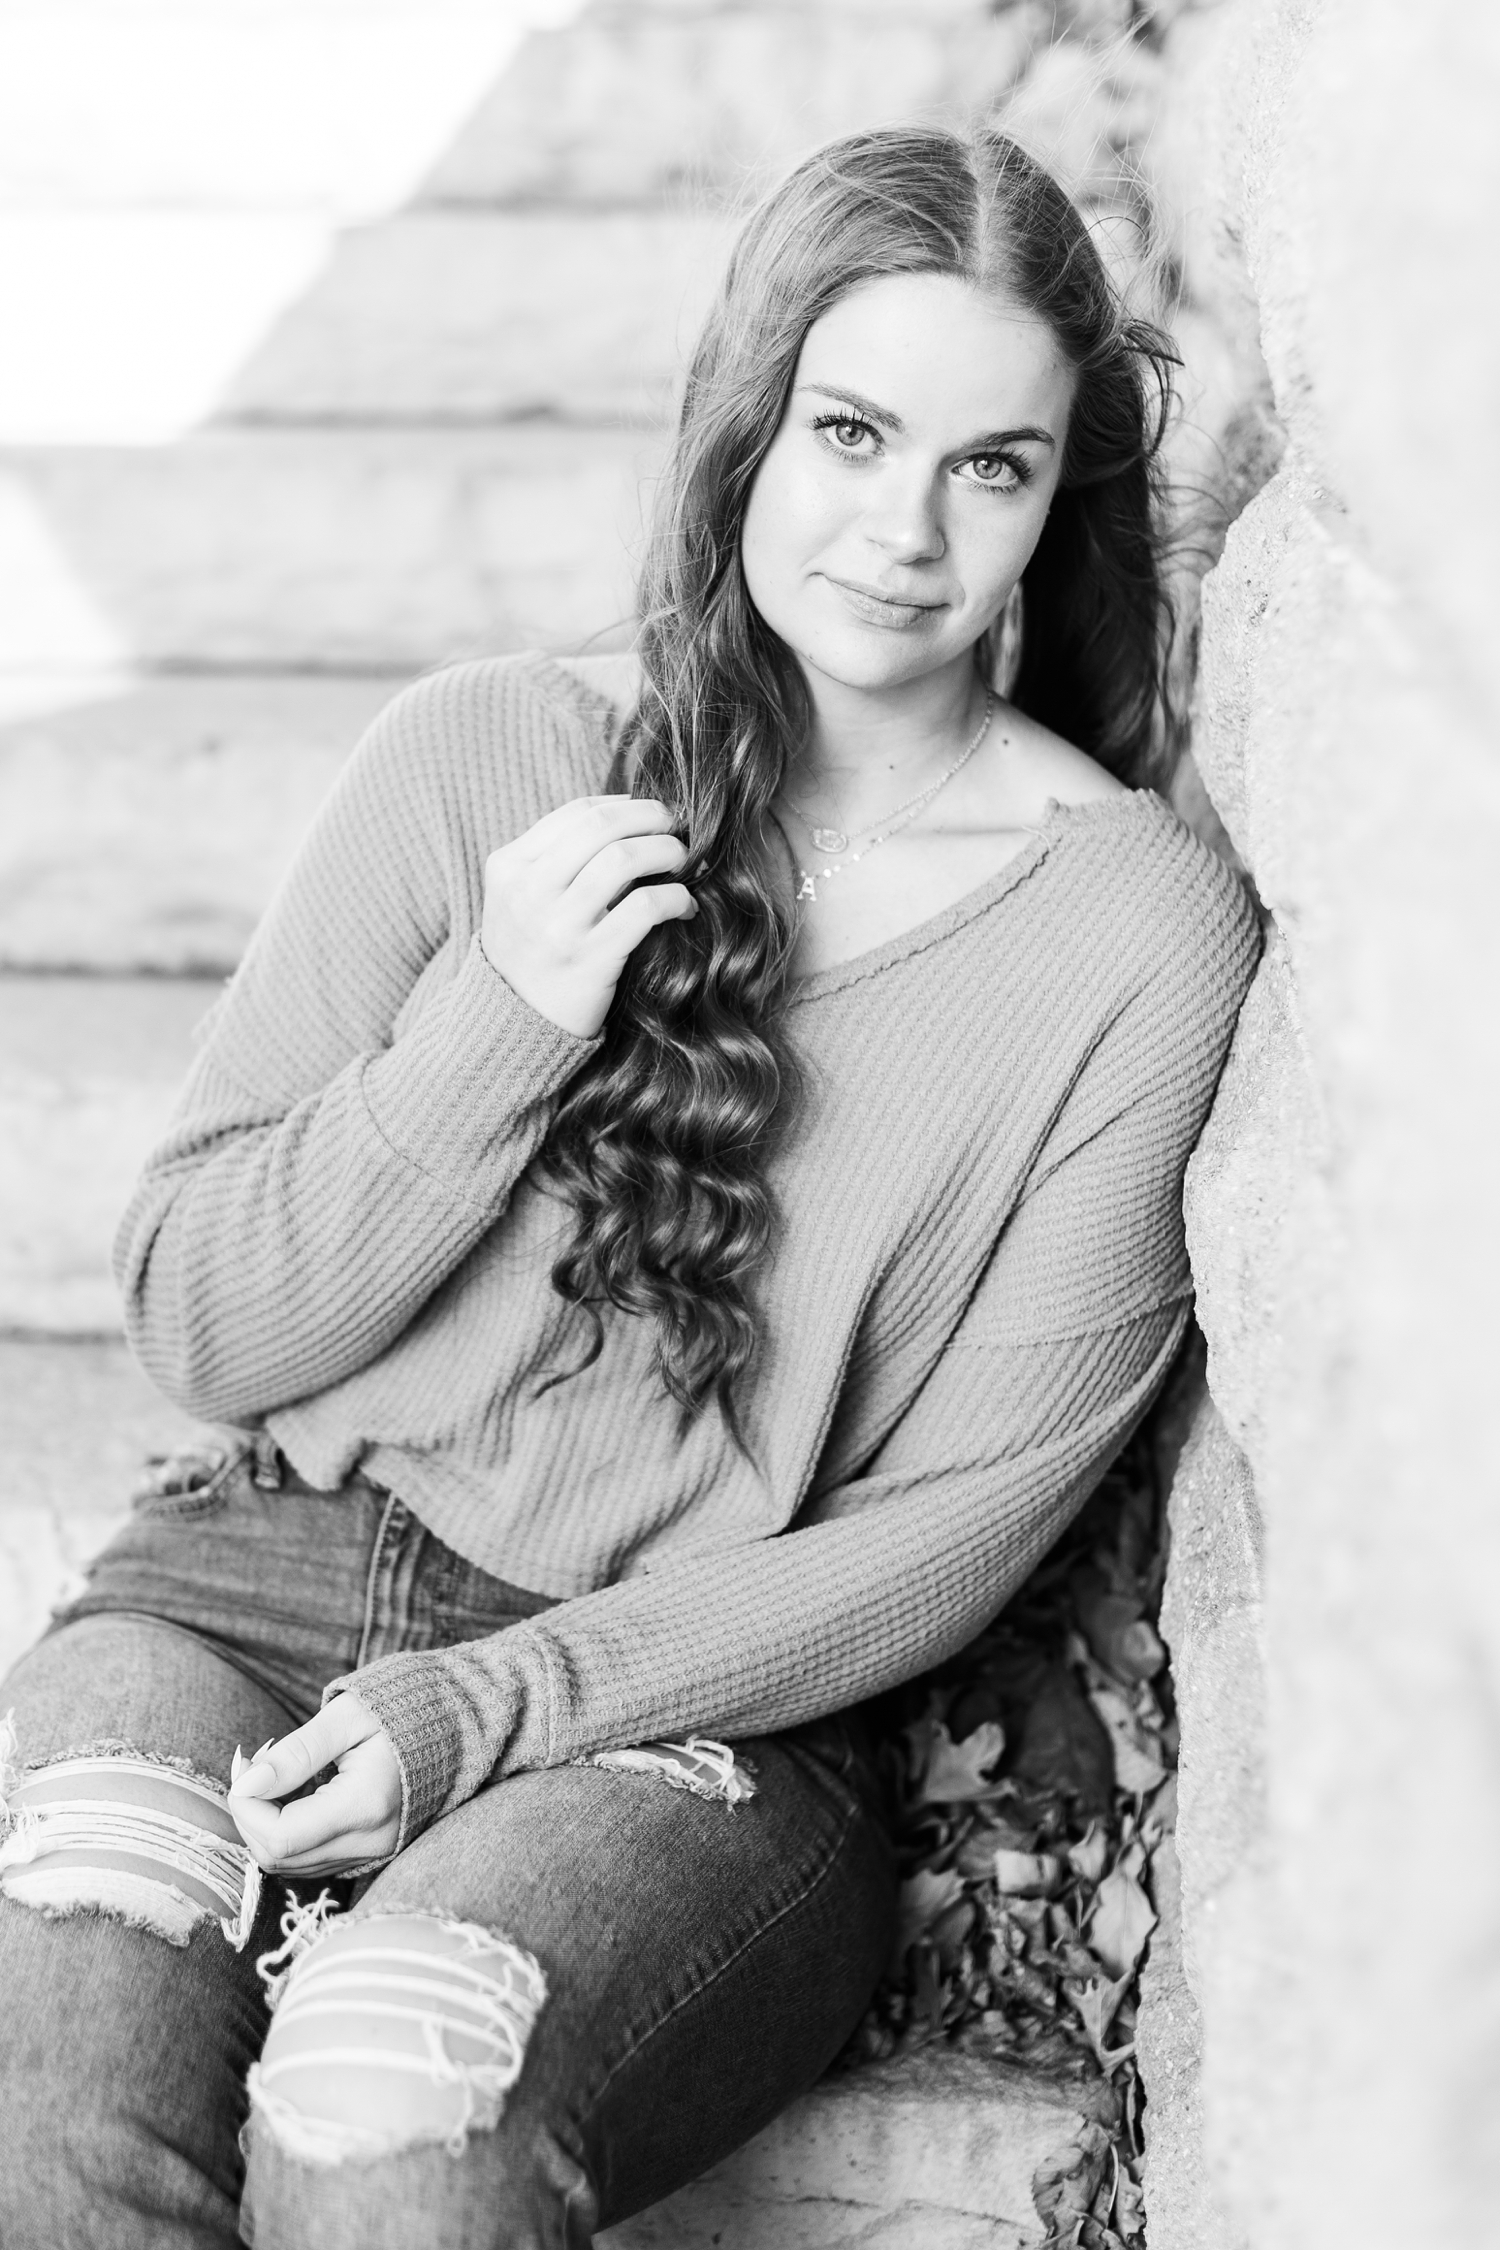 Avery sits and leans on a stone stairway | CB Studio